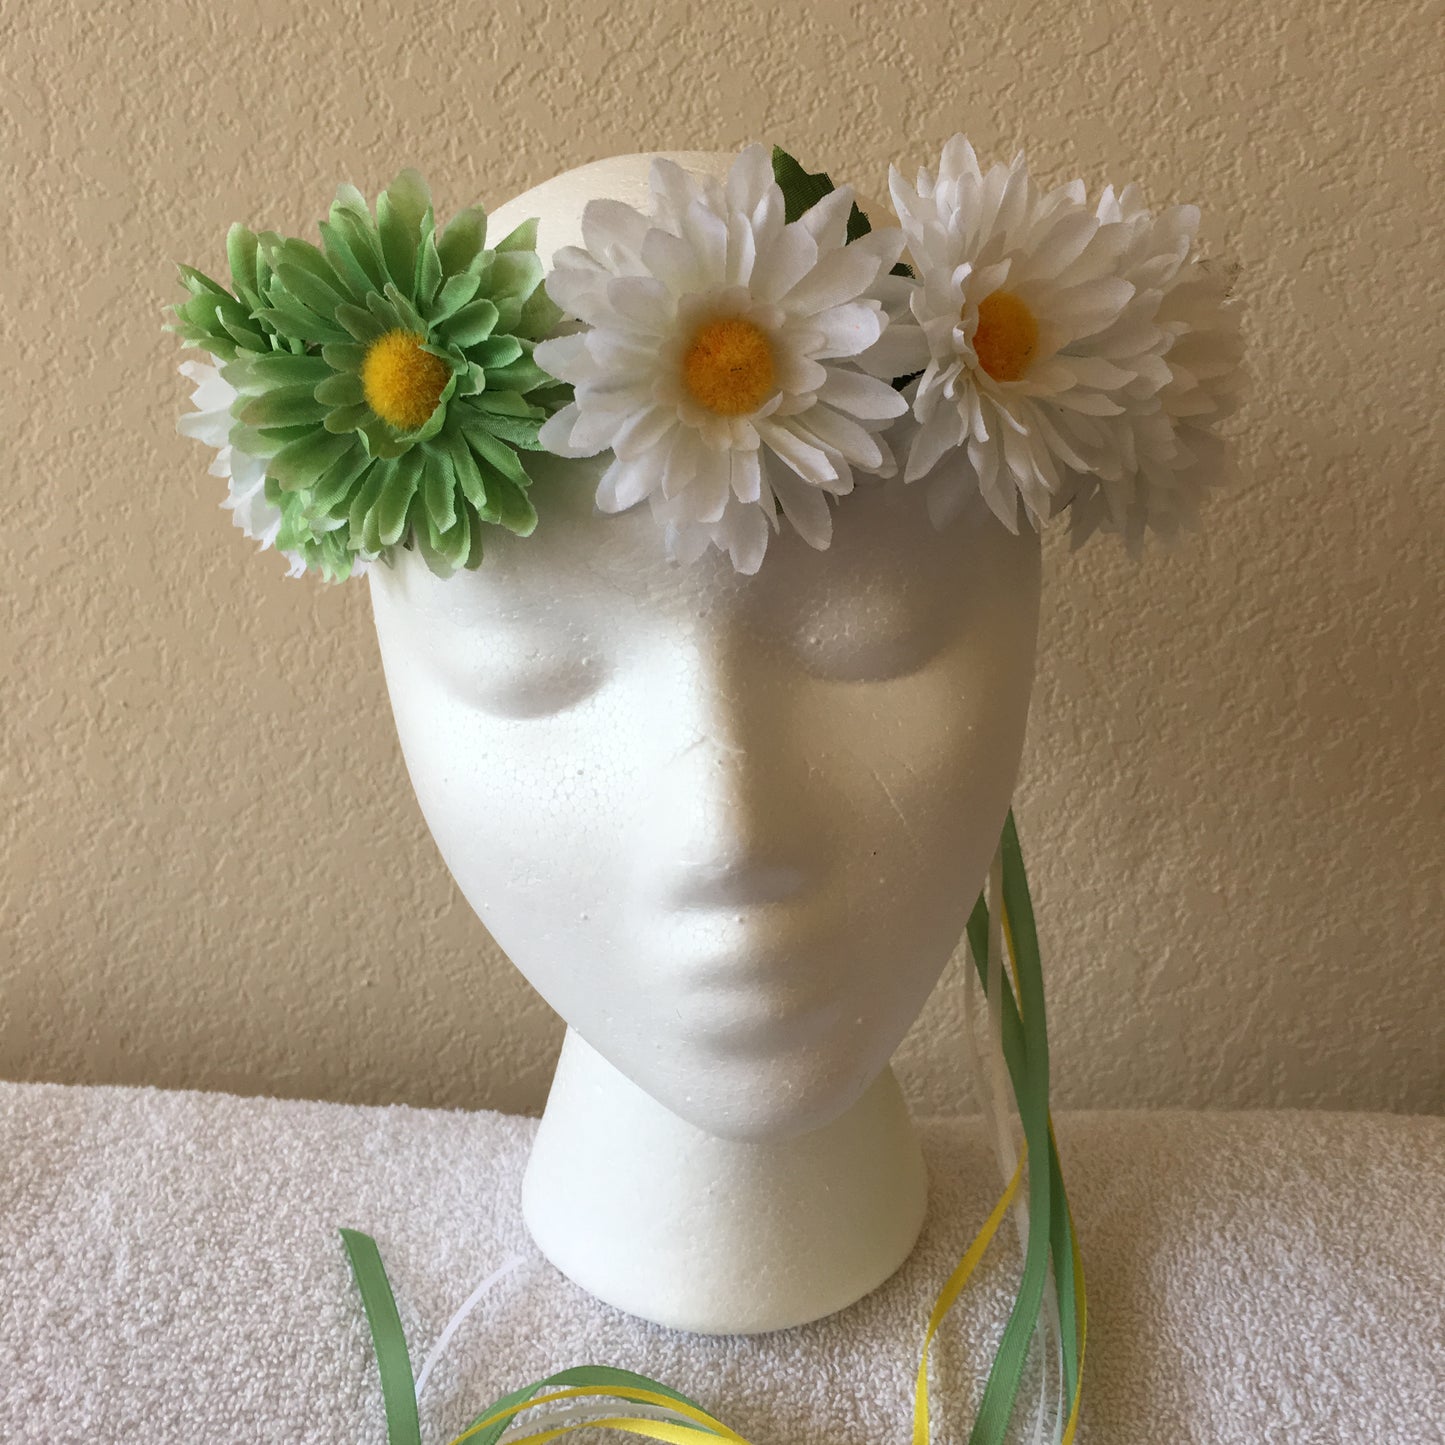 Small Wreath - White daisies w/ two mint green accent daisies